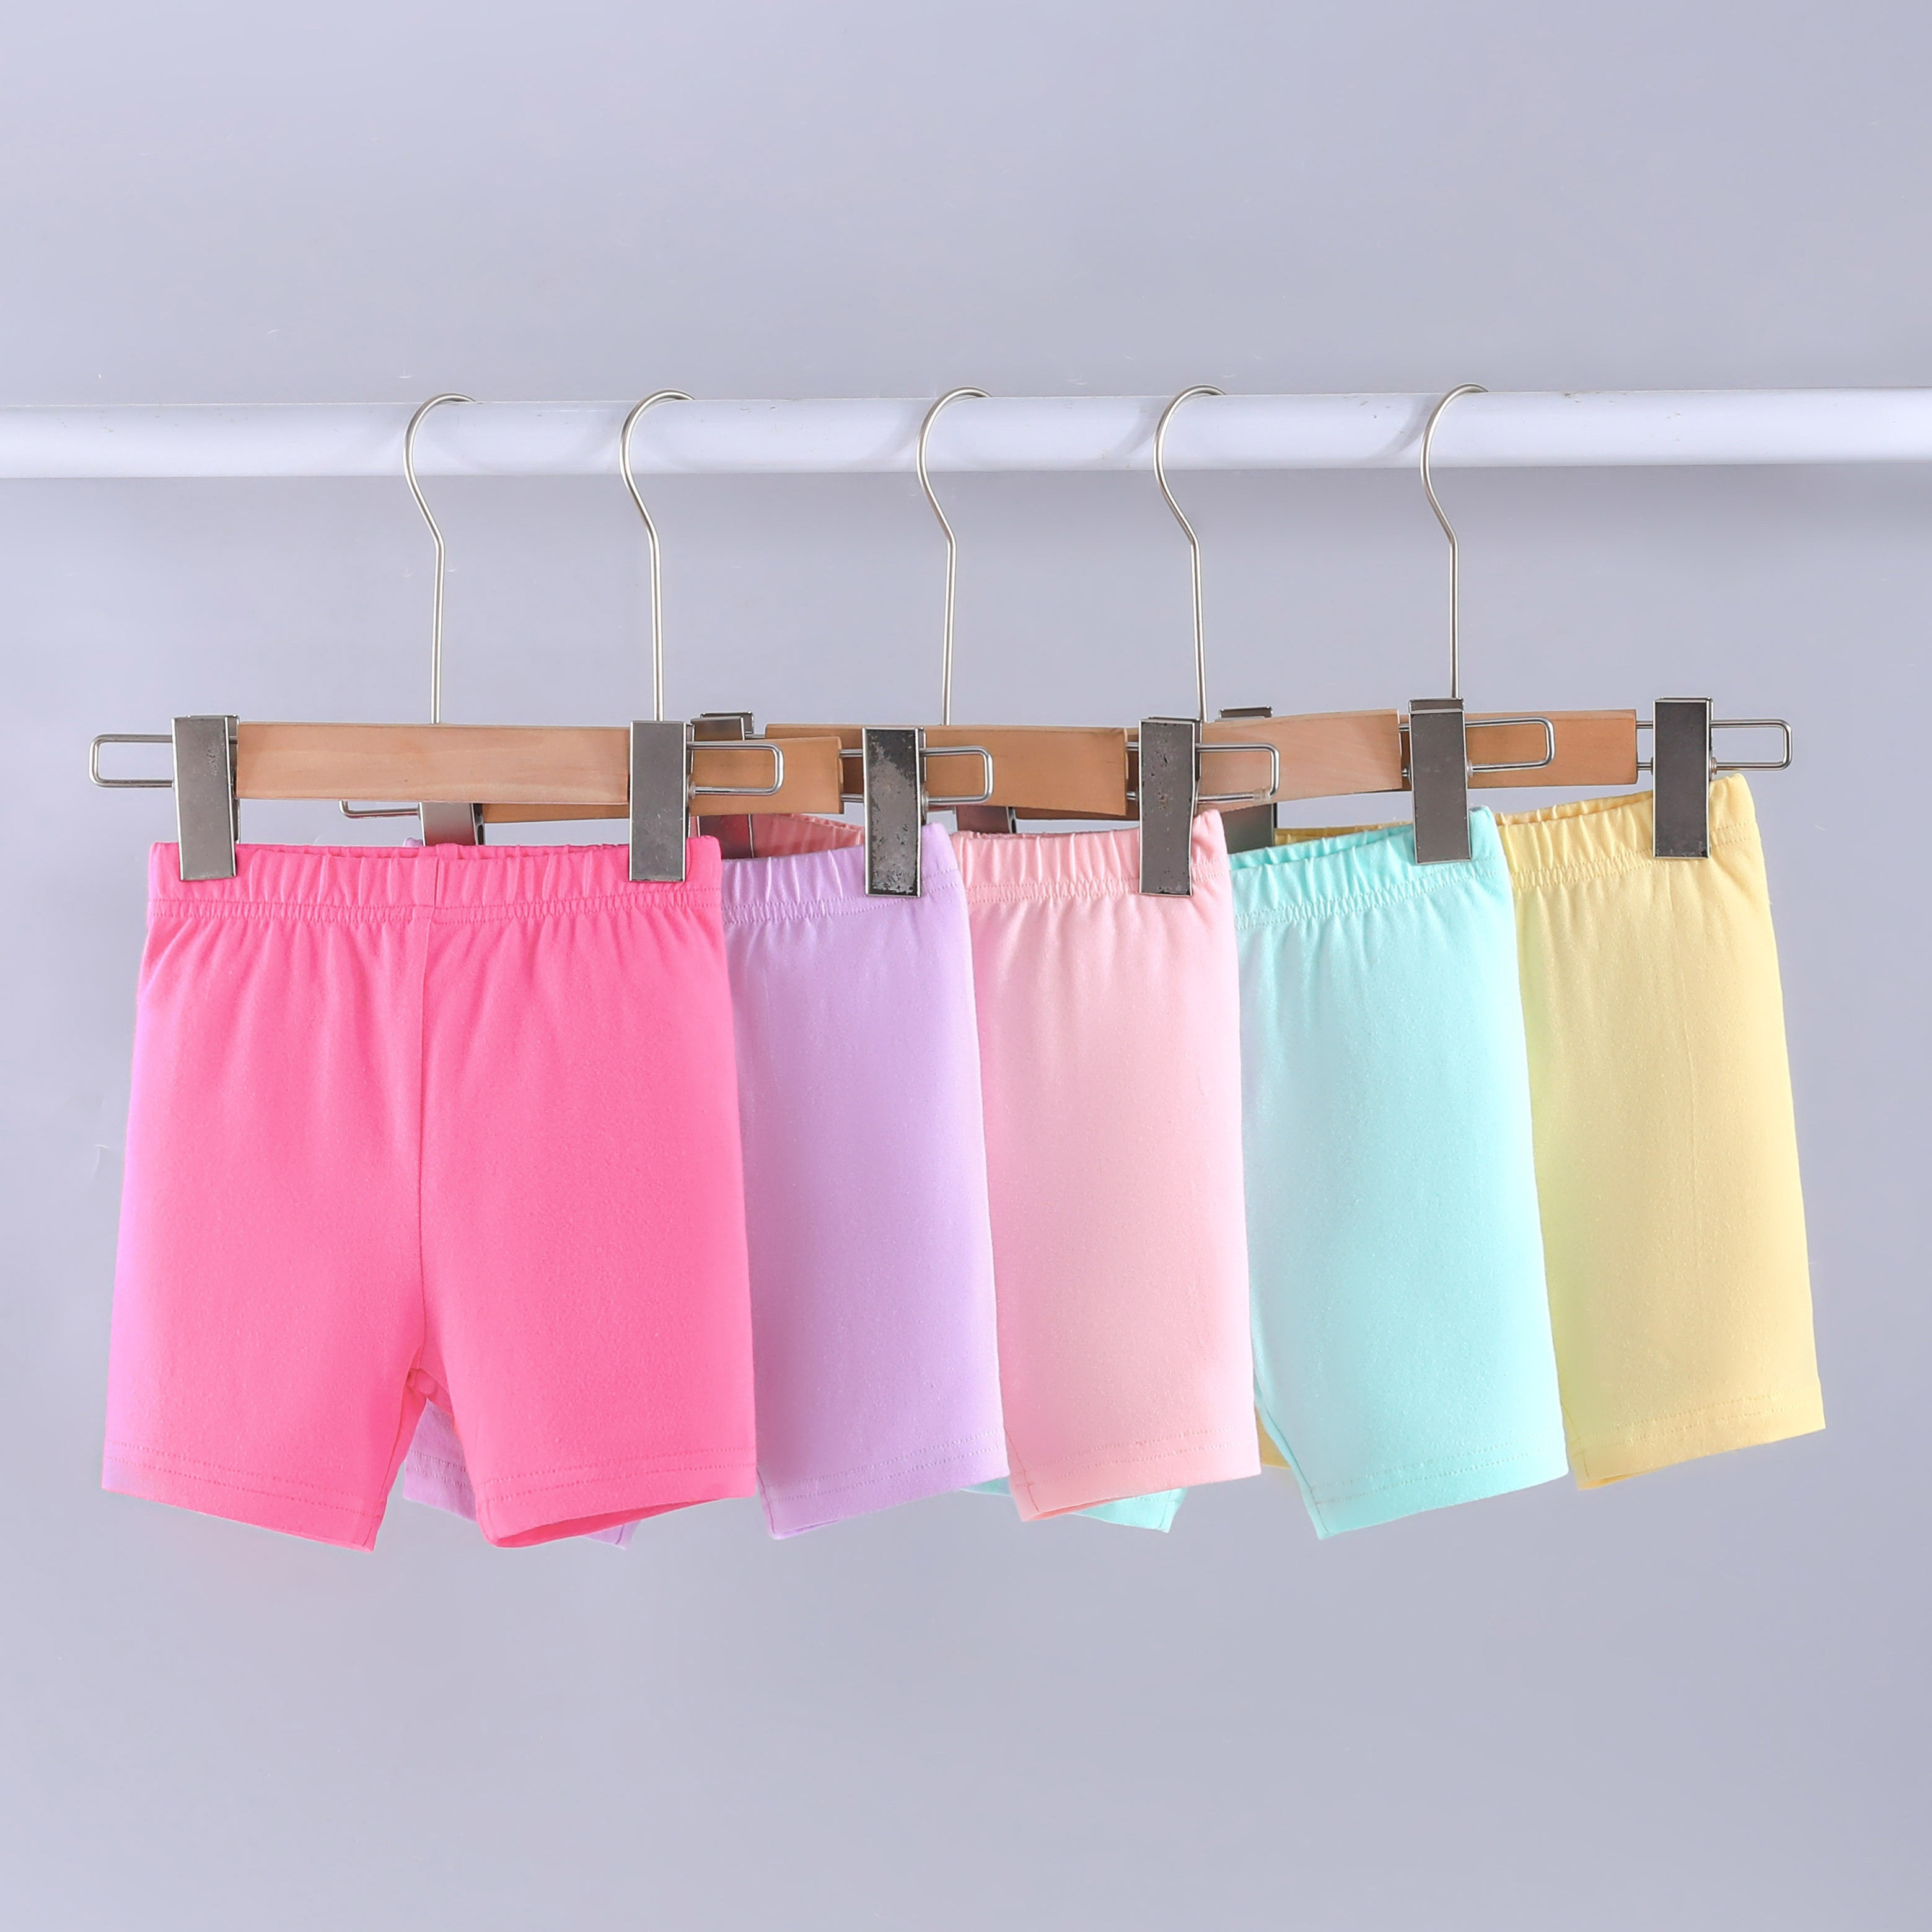 

5pcs Baby's Solid Color Casual Shorts, Candy-colored Comfy Elastic Waist Bottoms, Infant & Toddler Girl's Clothing For Summer Outdoor